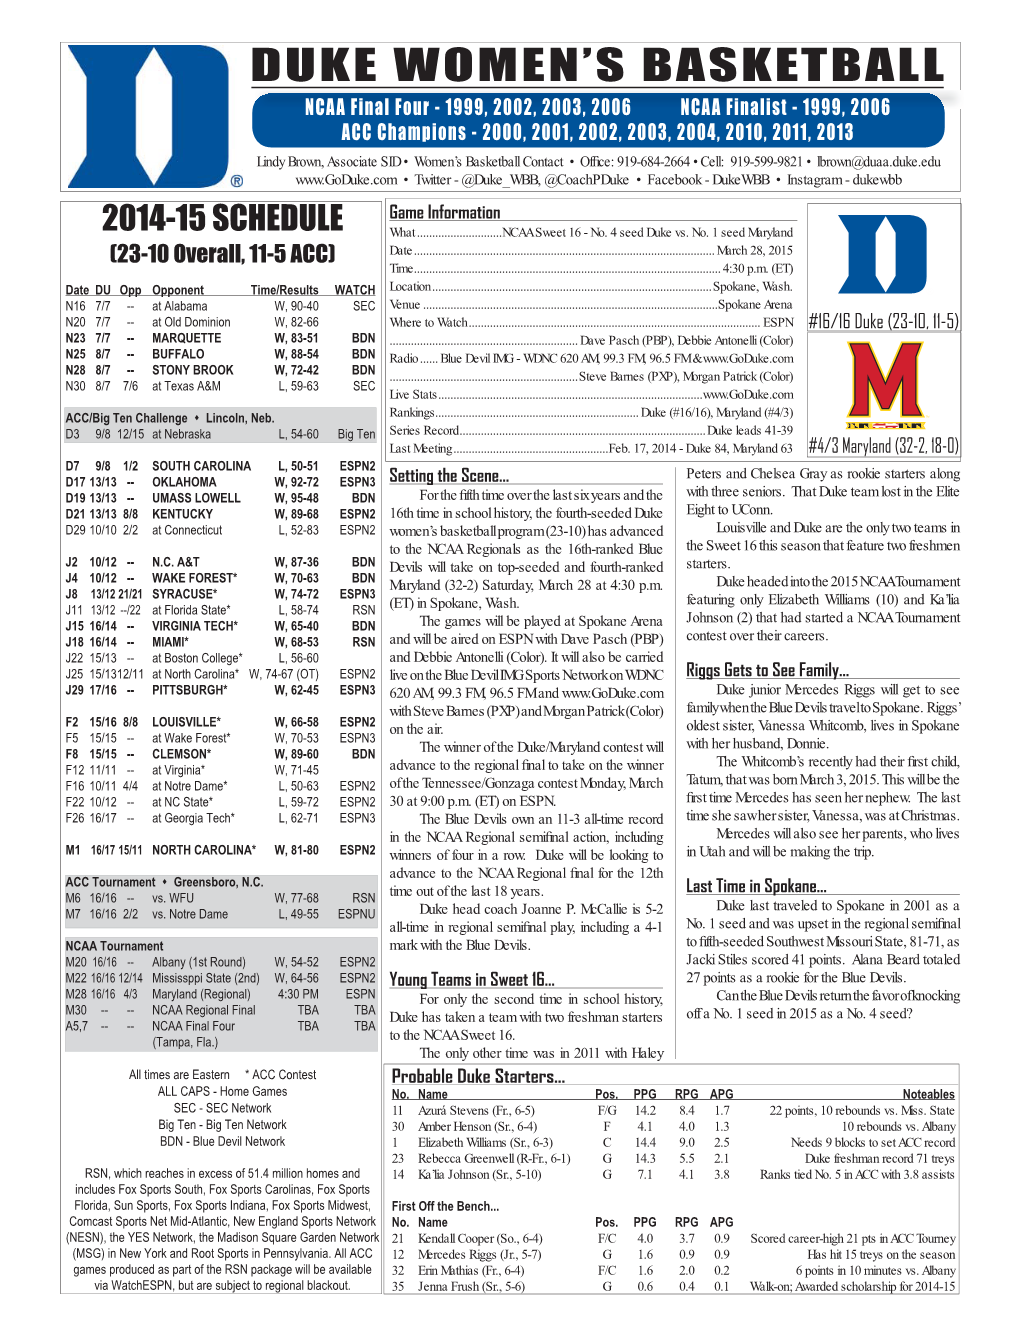 2014-15 WBB Game Notes